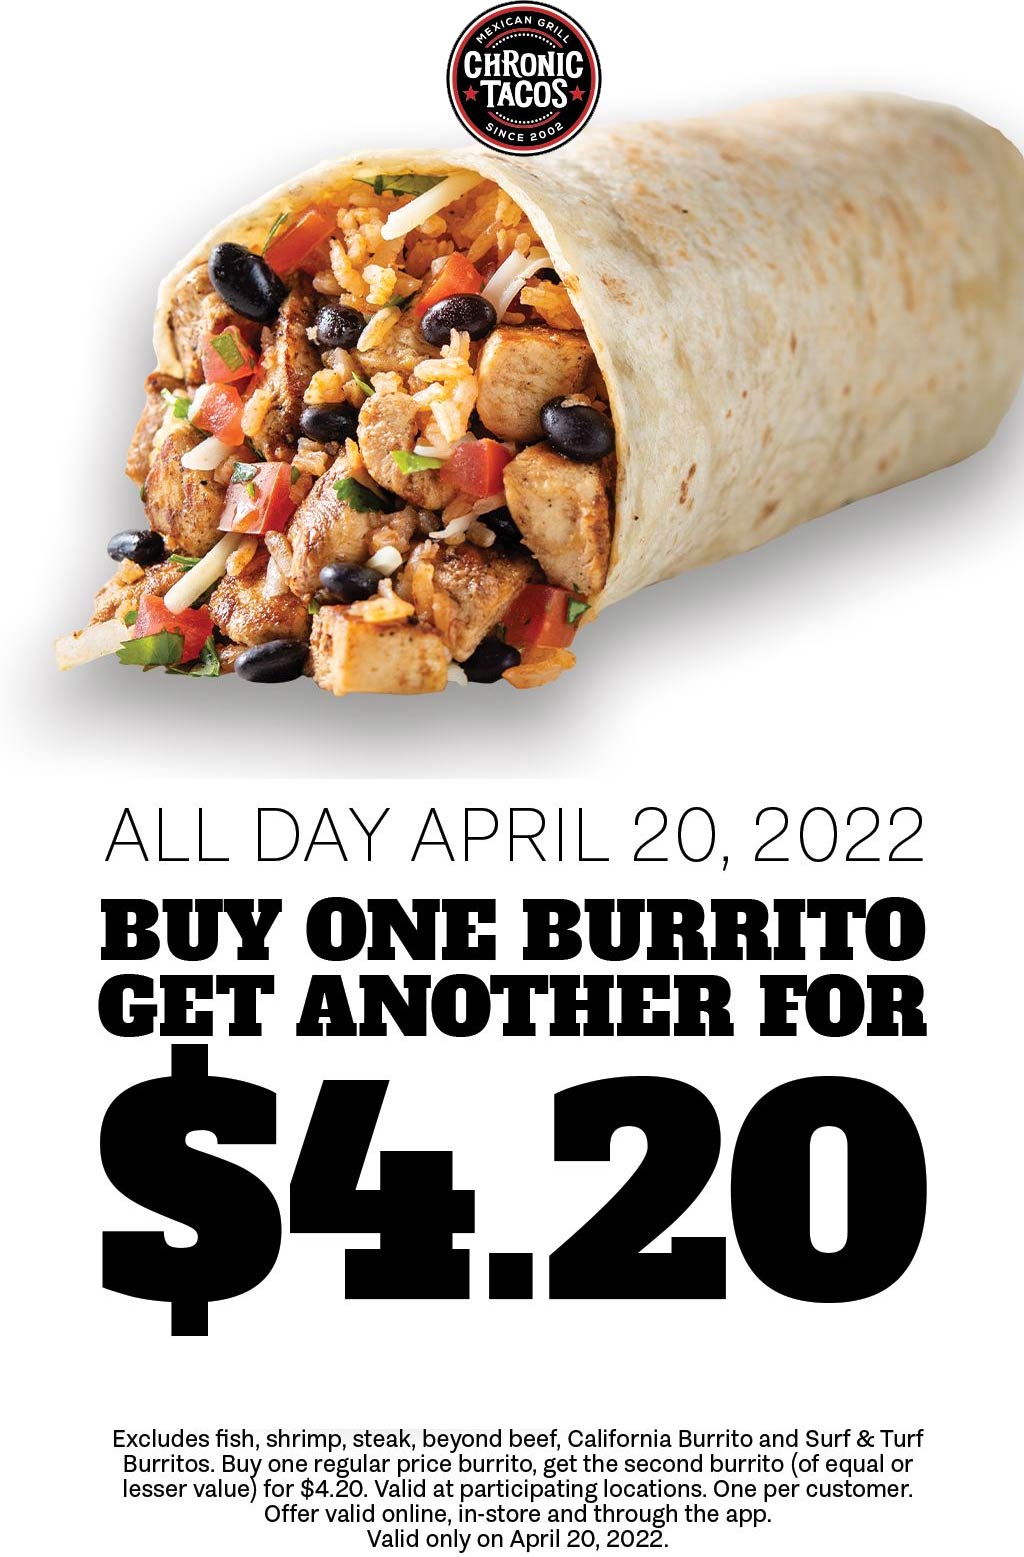 Chronic Tacos restaurants Coupon  Second burrito $4.20 Wednesday at Chronic Tacos #chronictacos 